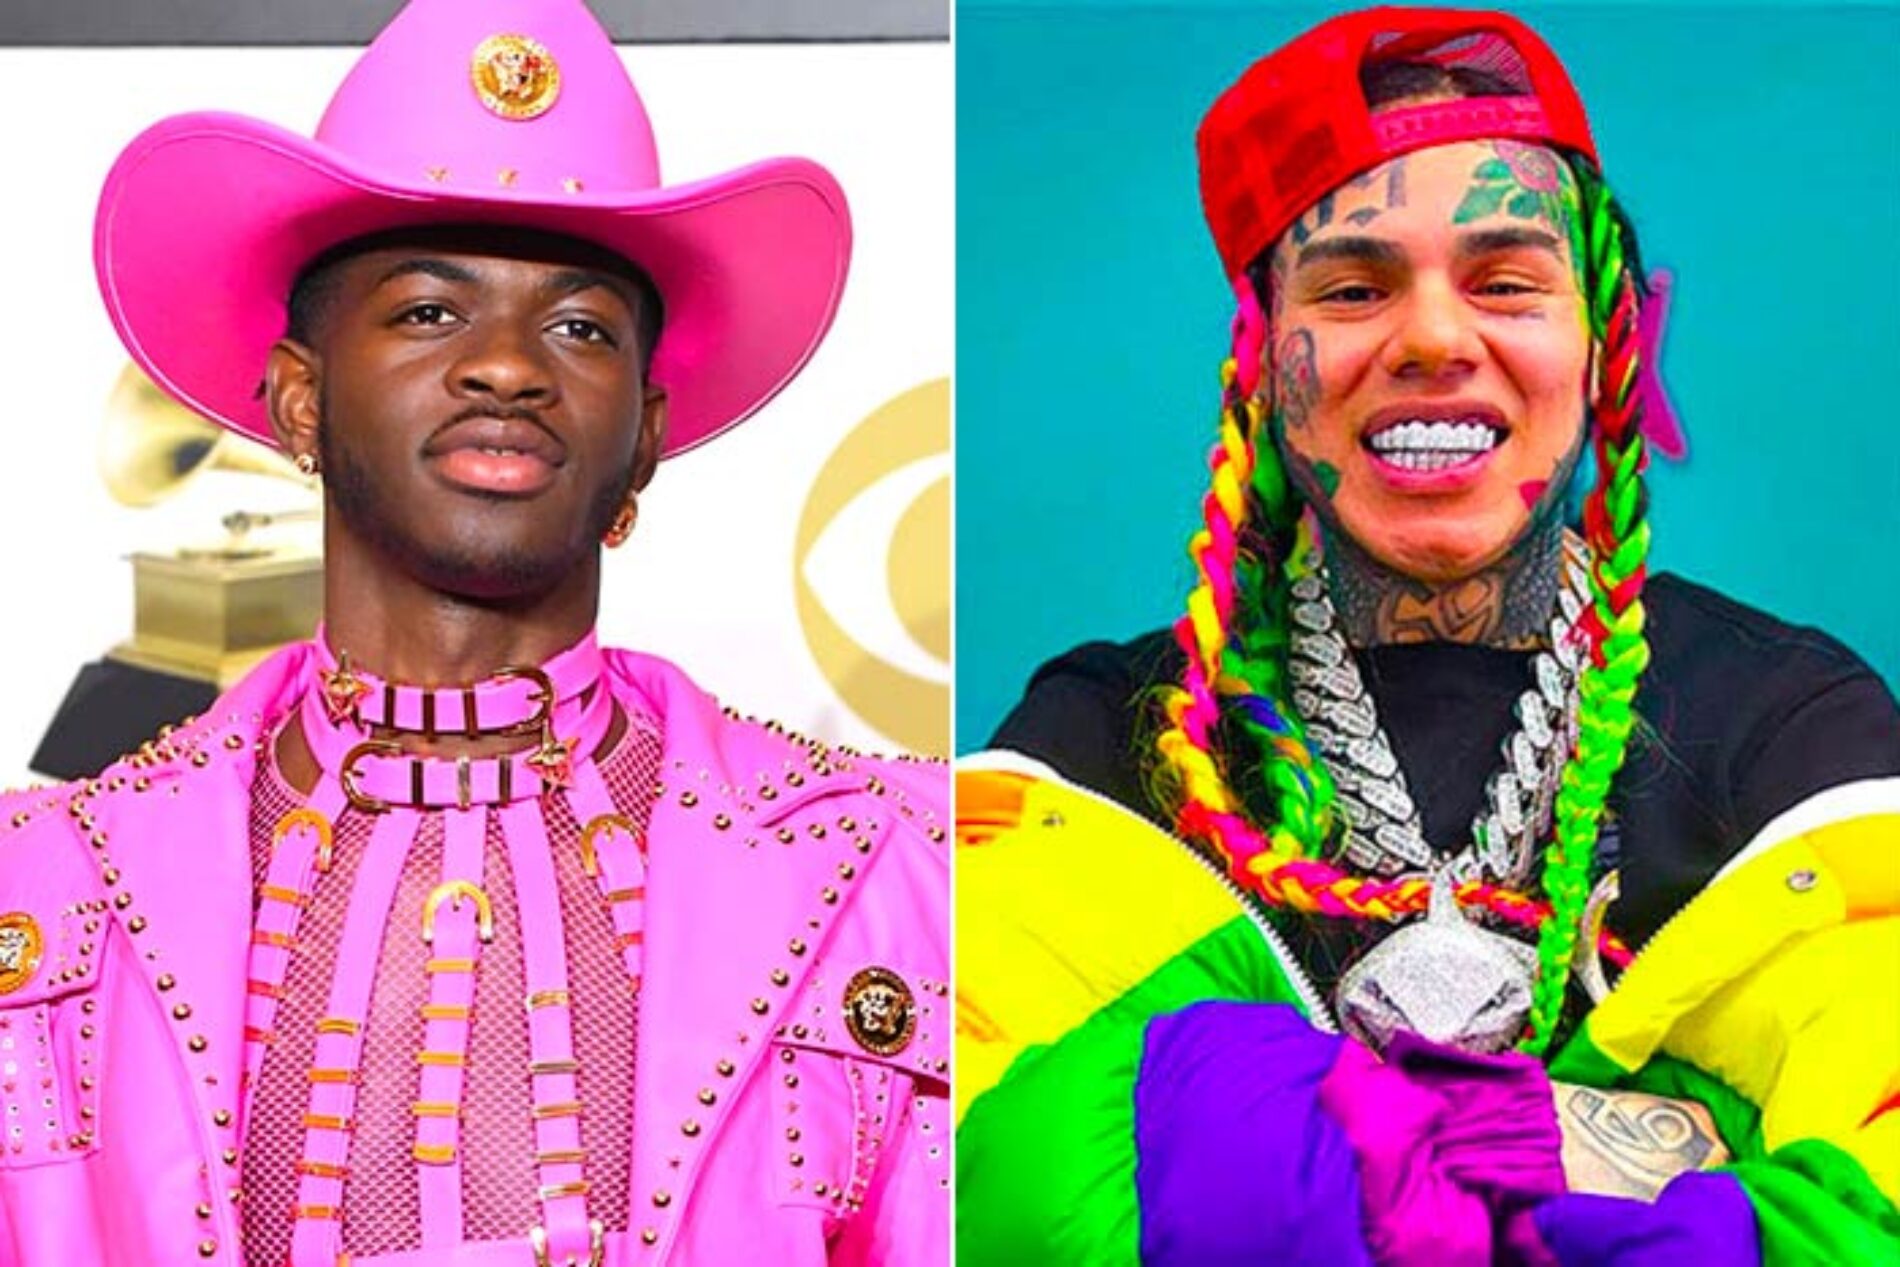 Lil Nas X Responds To Tekashi 6ix9ine’s Homophobic Comments, Says He Slid Into His DMs